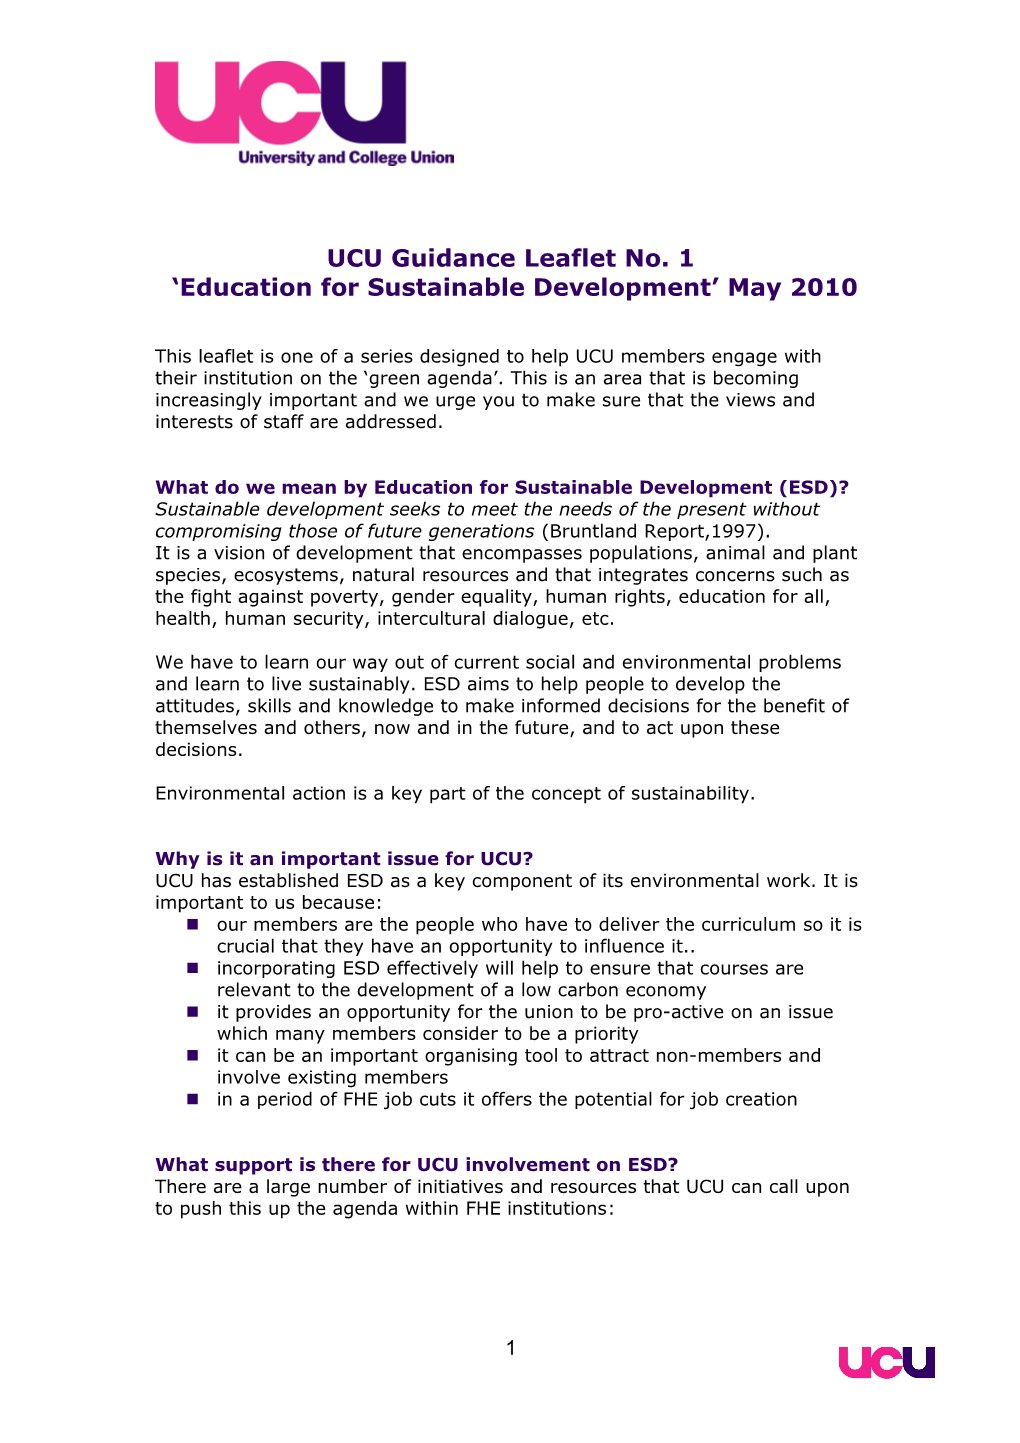 UCU Guidance Education for Sustainable Development